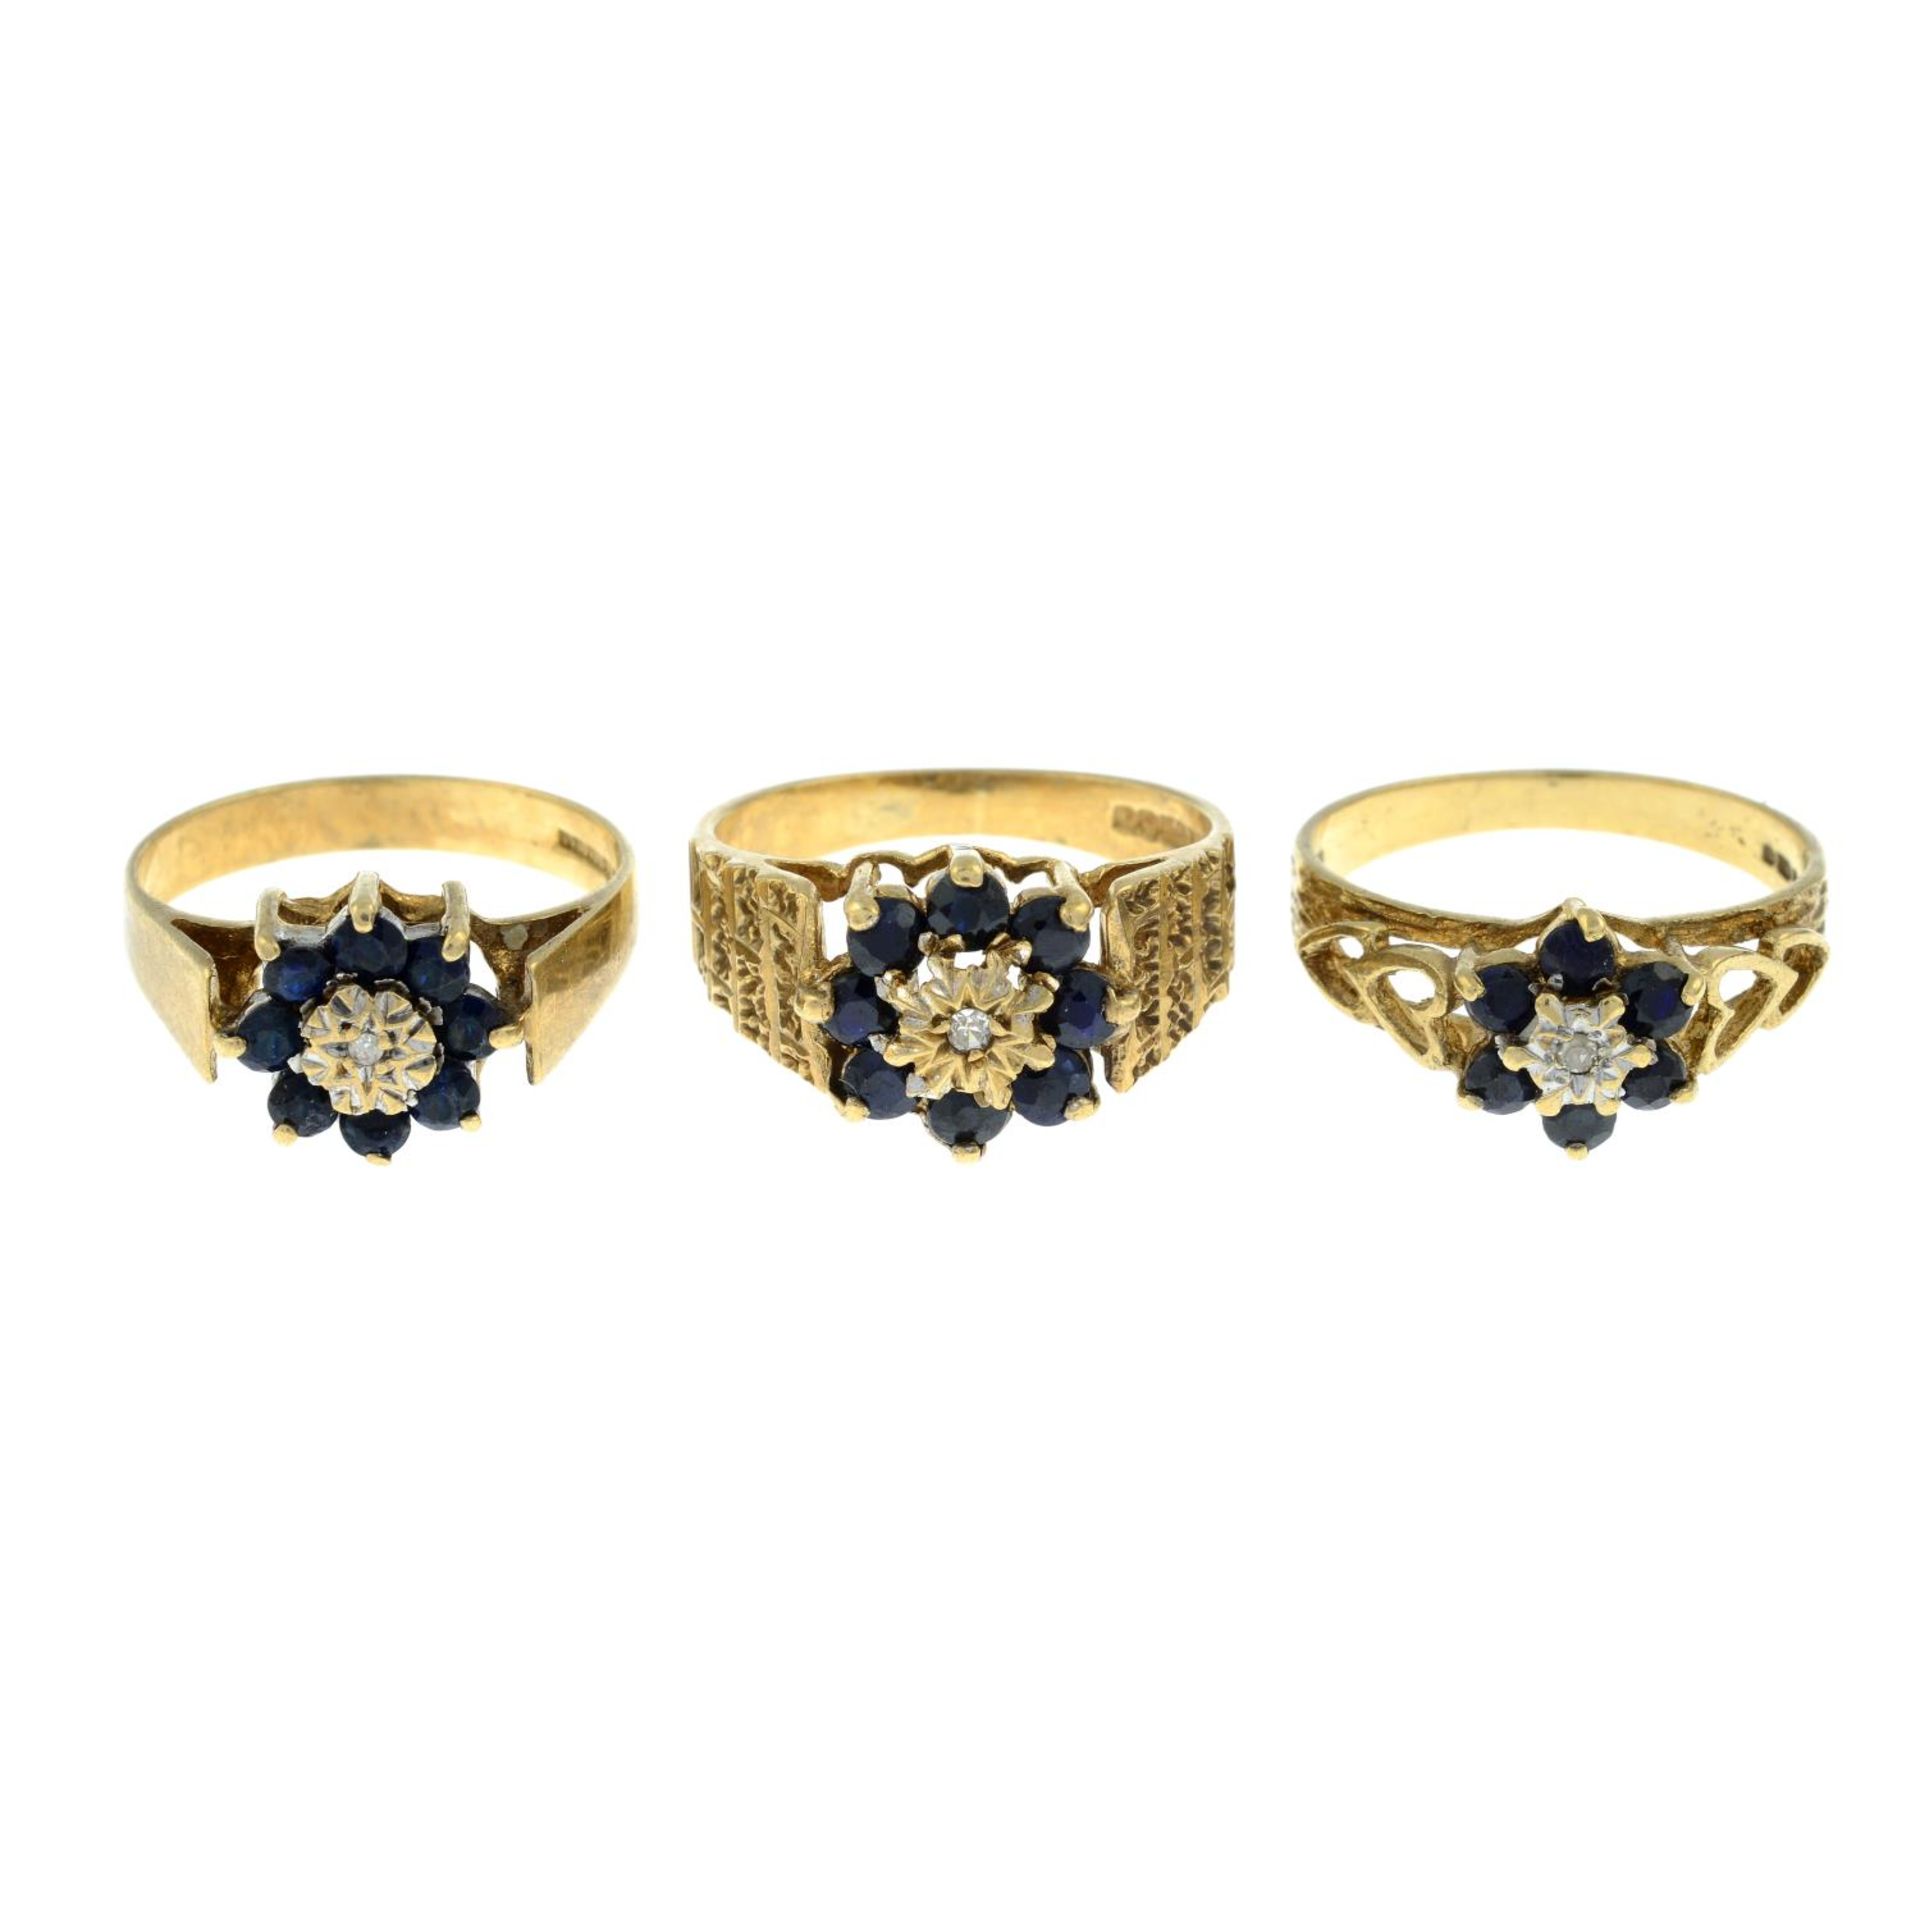 Three 9ct gold sapphire and diamond cluster rings.Two with Hallmarks for Birmingham.